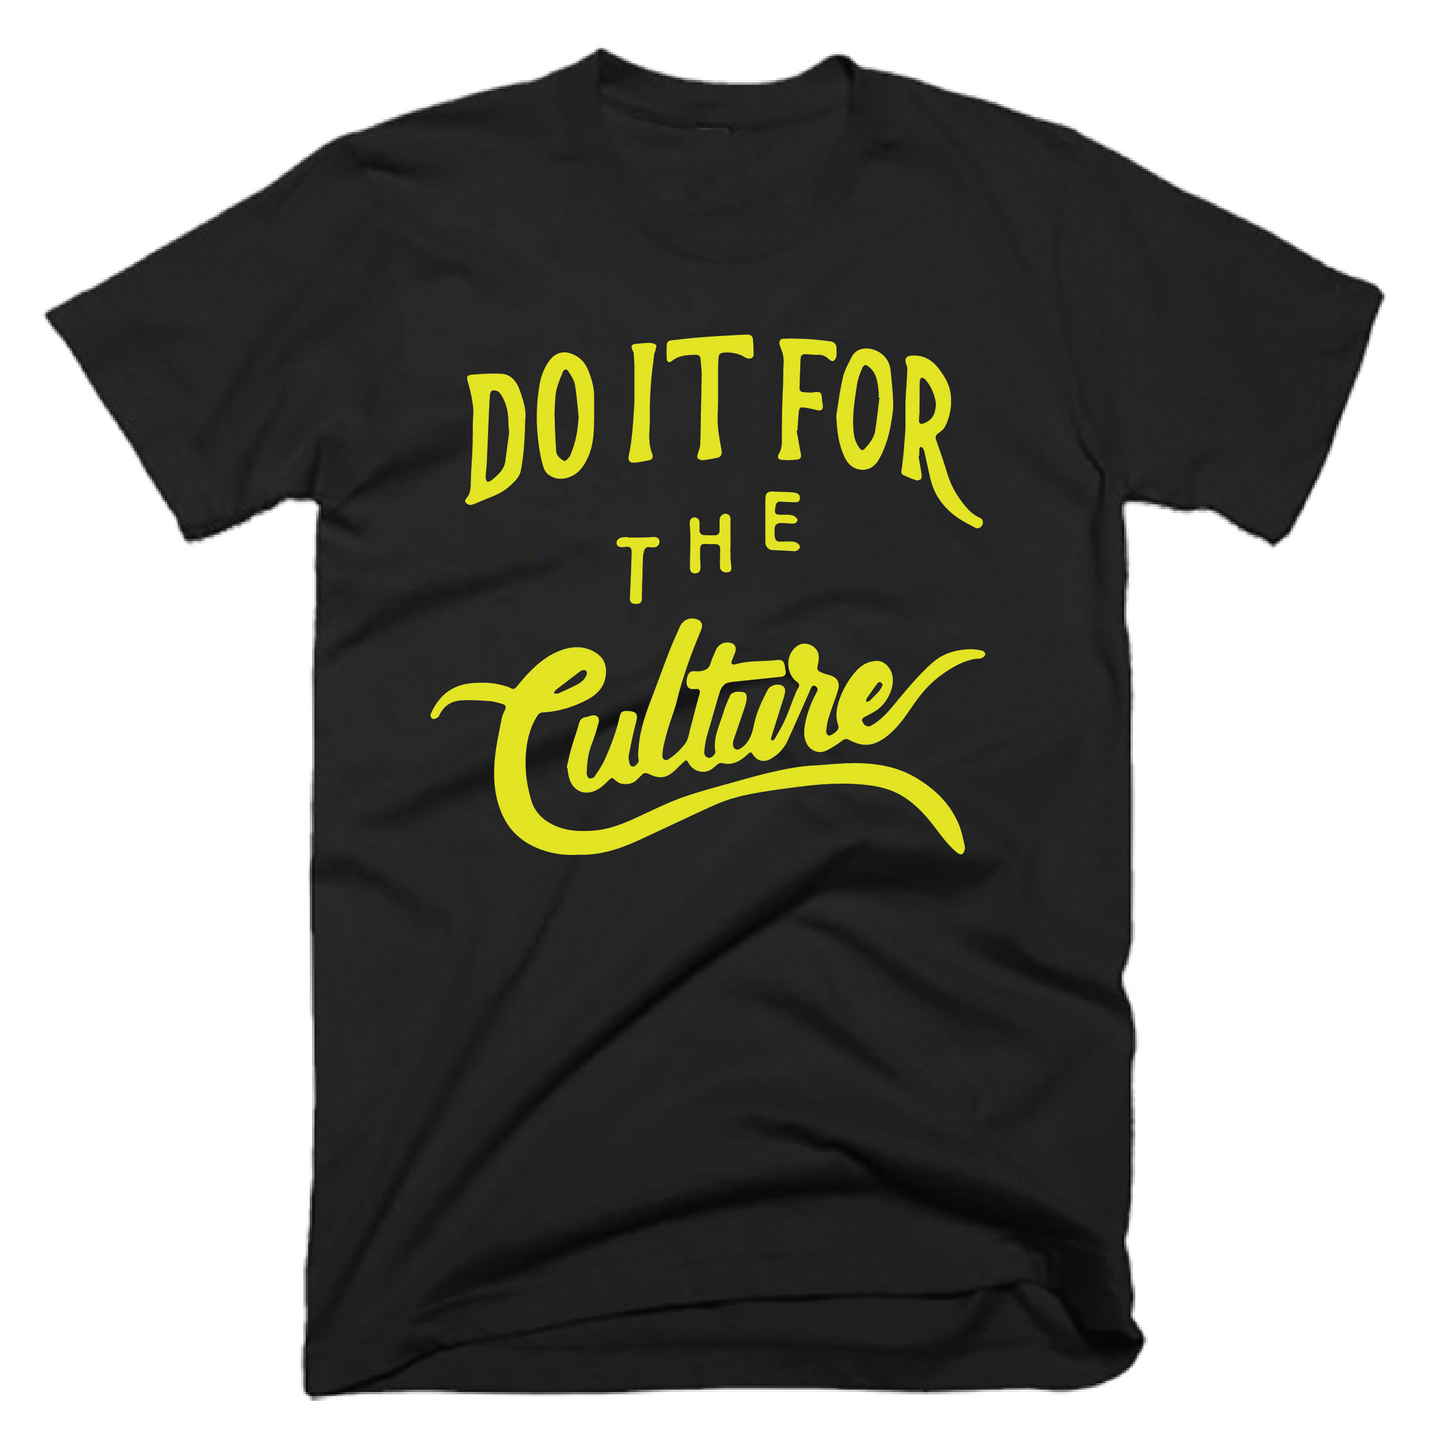 DO IT FOR THE CULTURE- BLACK & NEON- UNISEX FIT